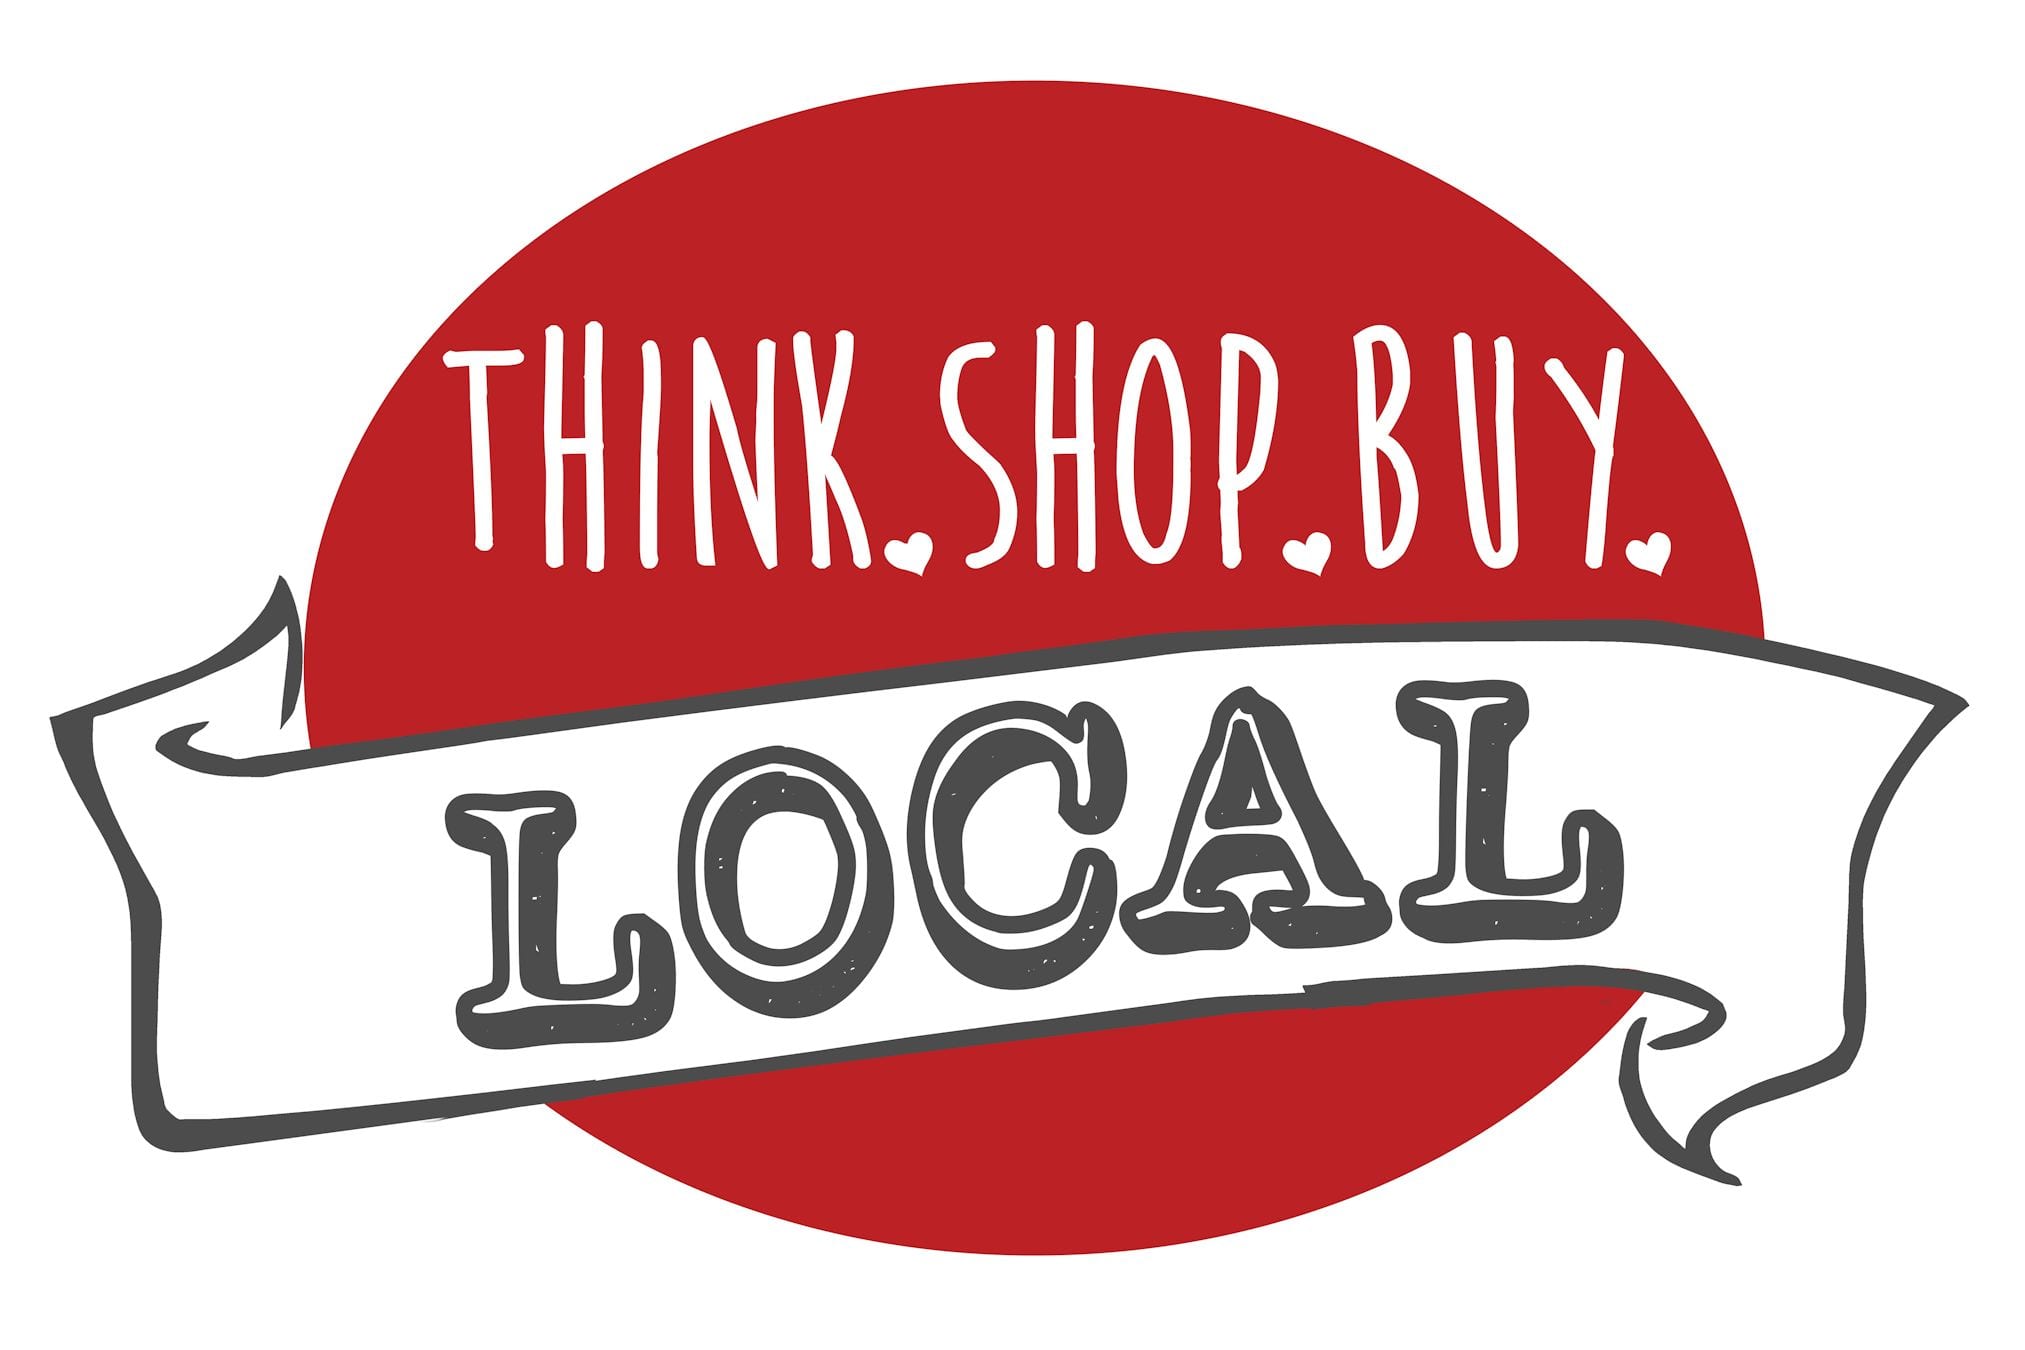 10 Reasons to Shop Local - Inclan Interactive